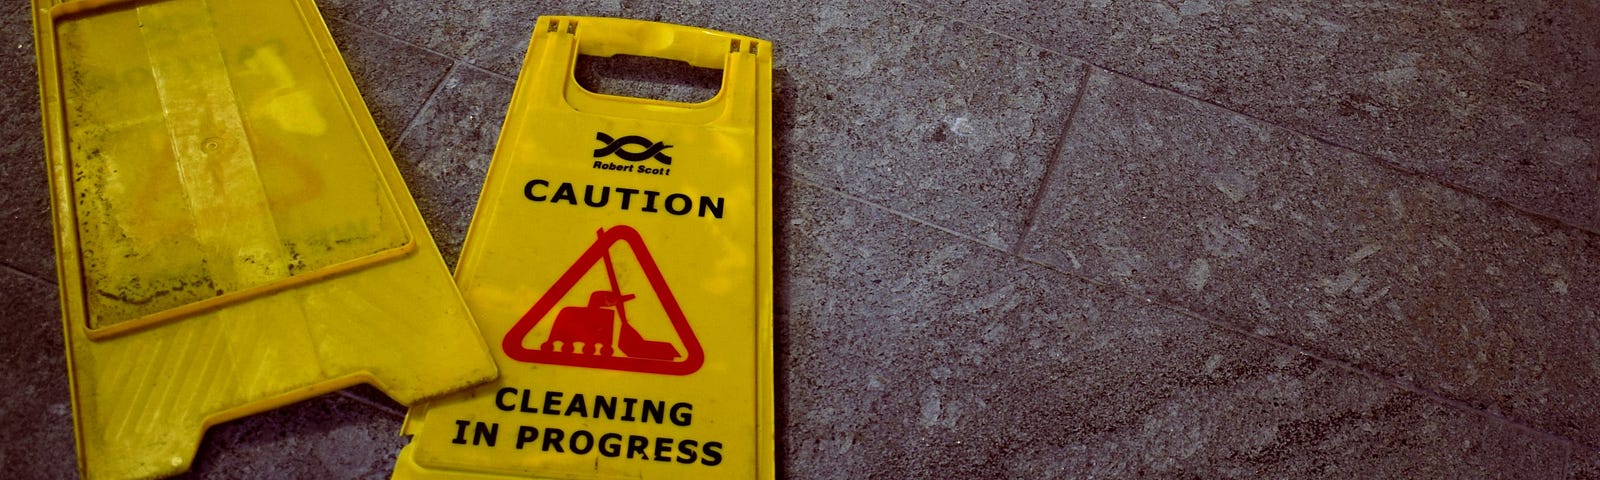 Caution. Cleaning in progress.